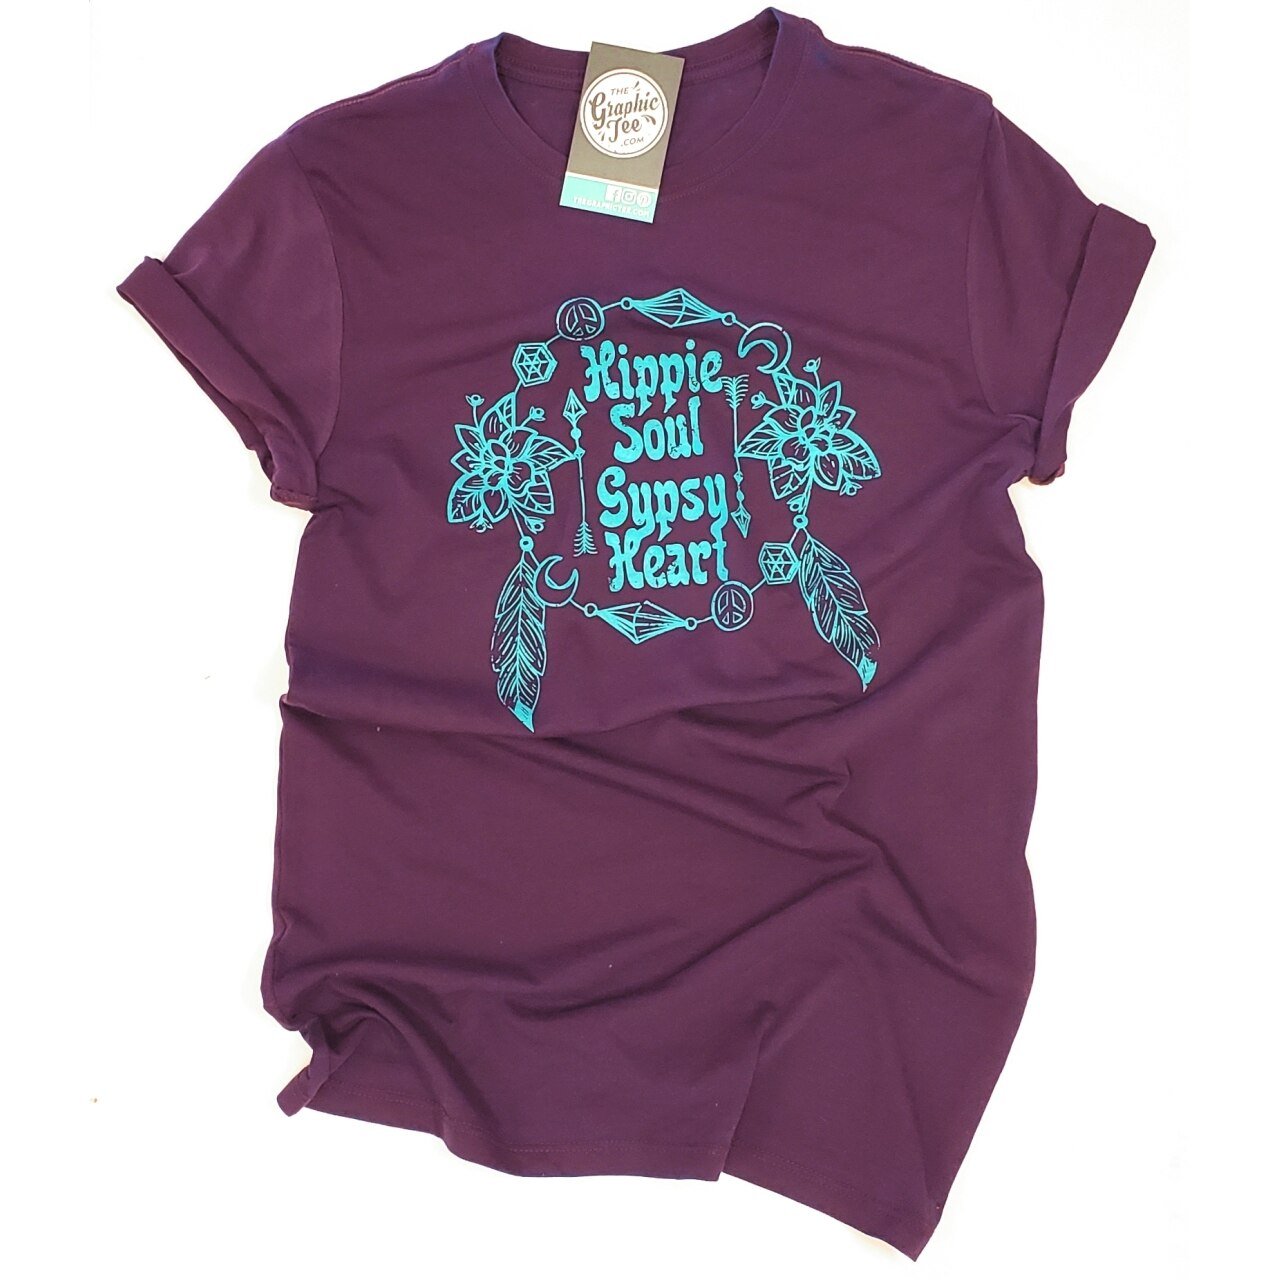 Hippie Soul, Gypsy Heart - Berry Tee - The Graphic Tee